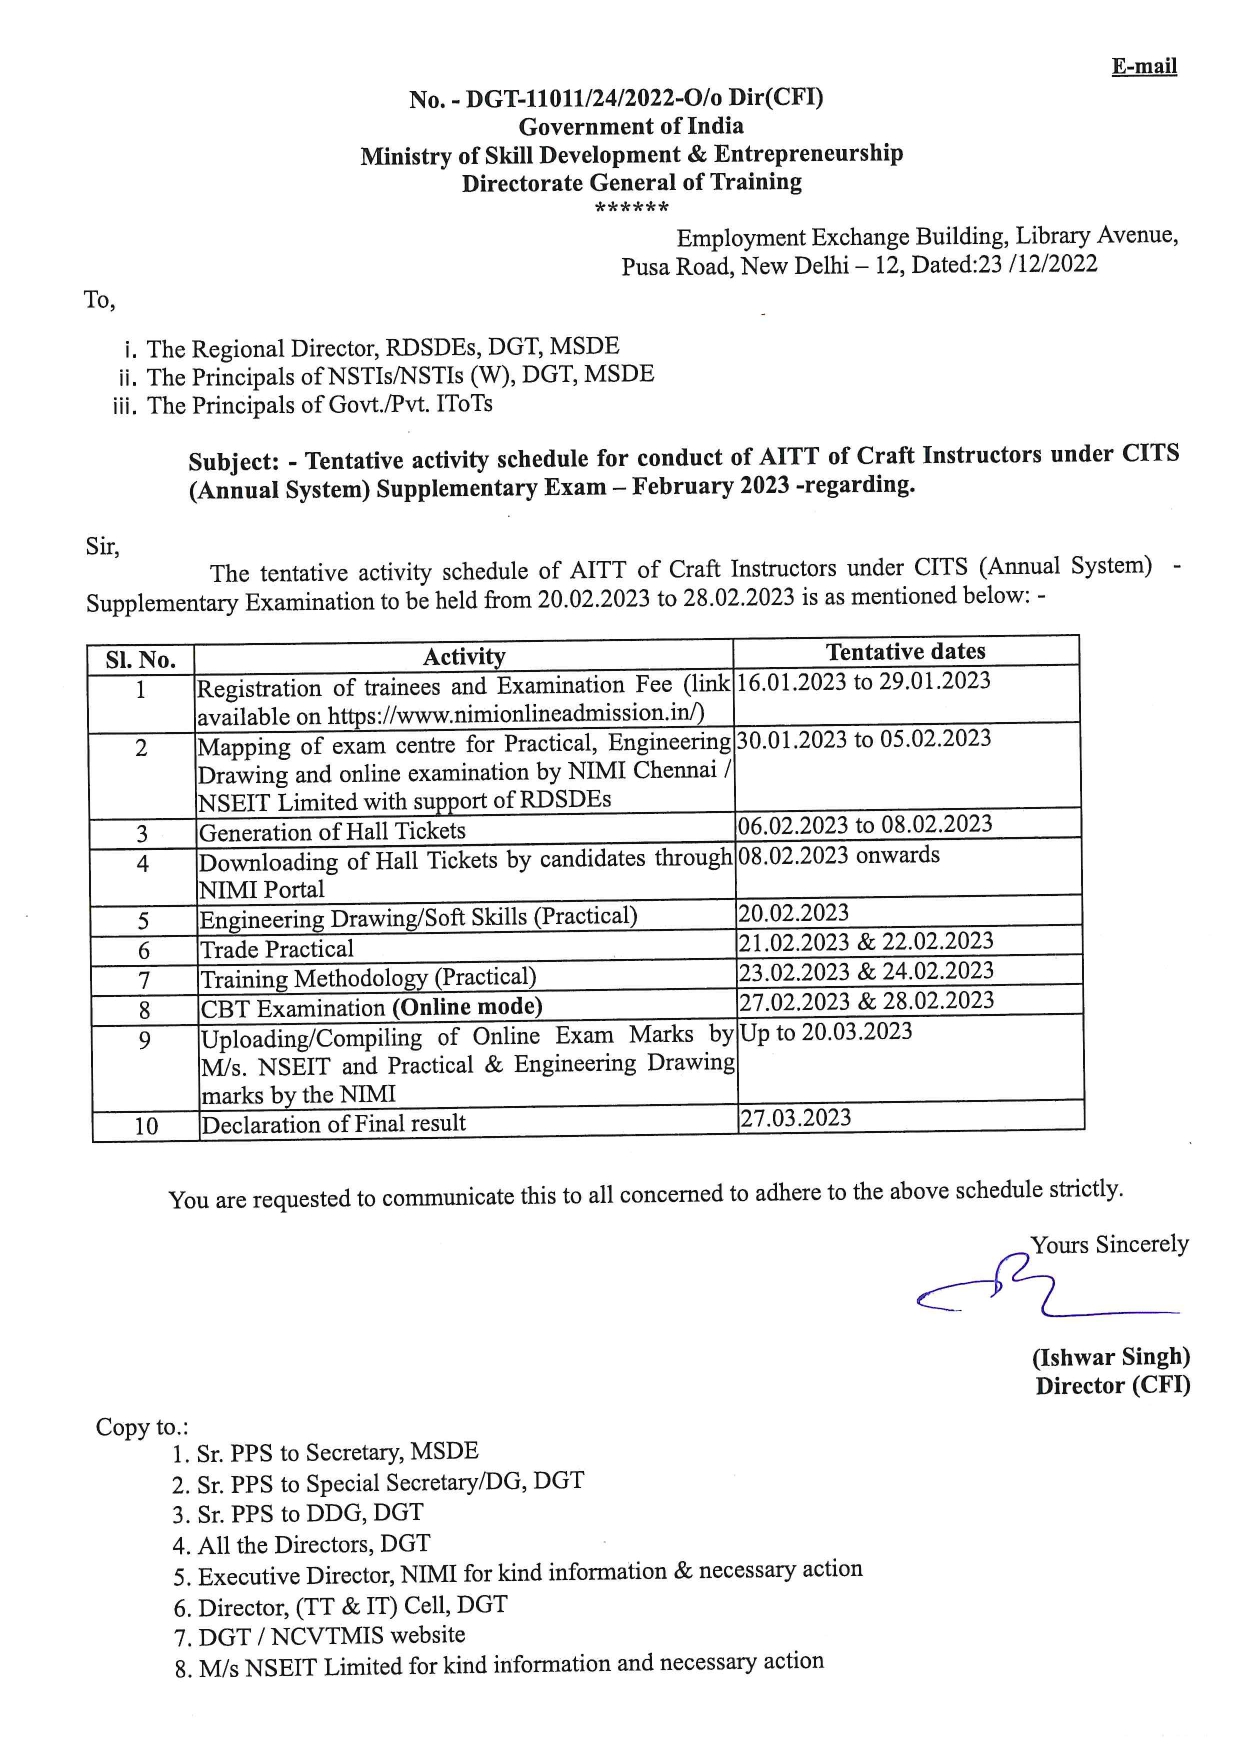 Tentative activity schedule for conduct of AITT of Craft Instructors under CITS (Annual System) Supplementary Exam – February 2023